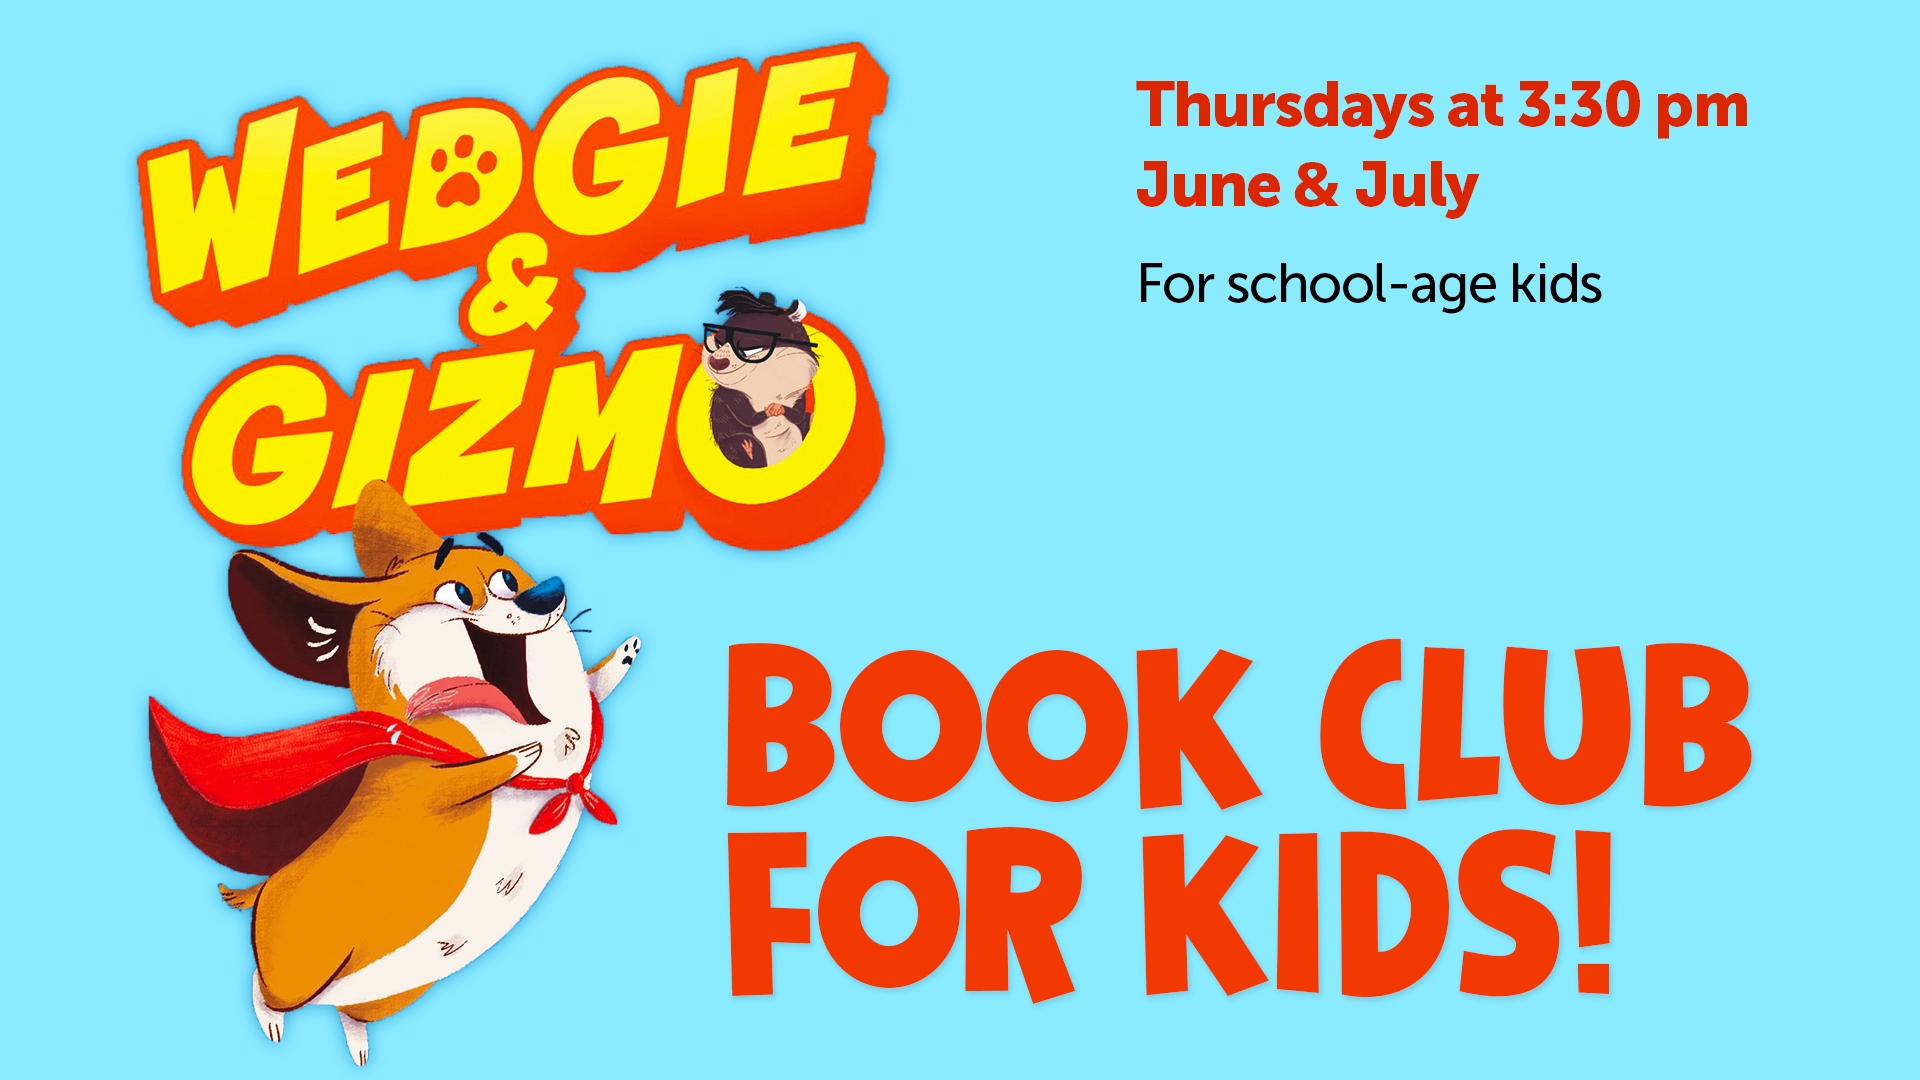 Image for Afternoon Adventures - Wedgie & Gizmo Book Club